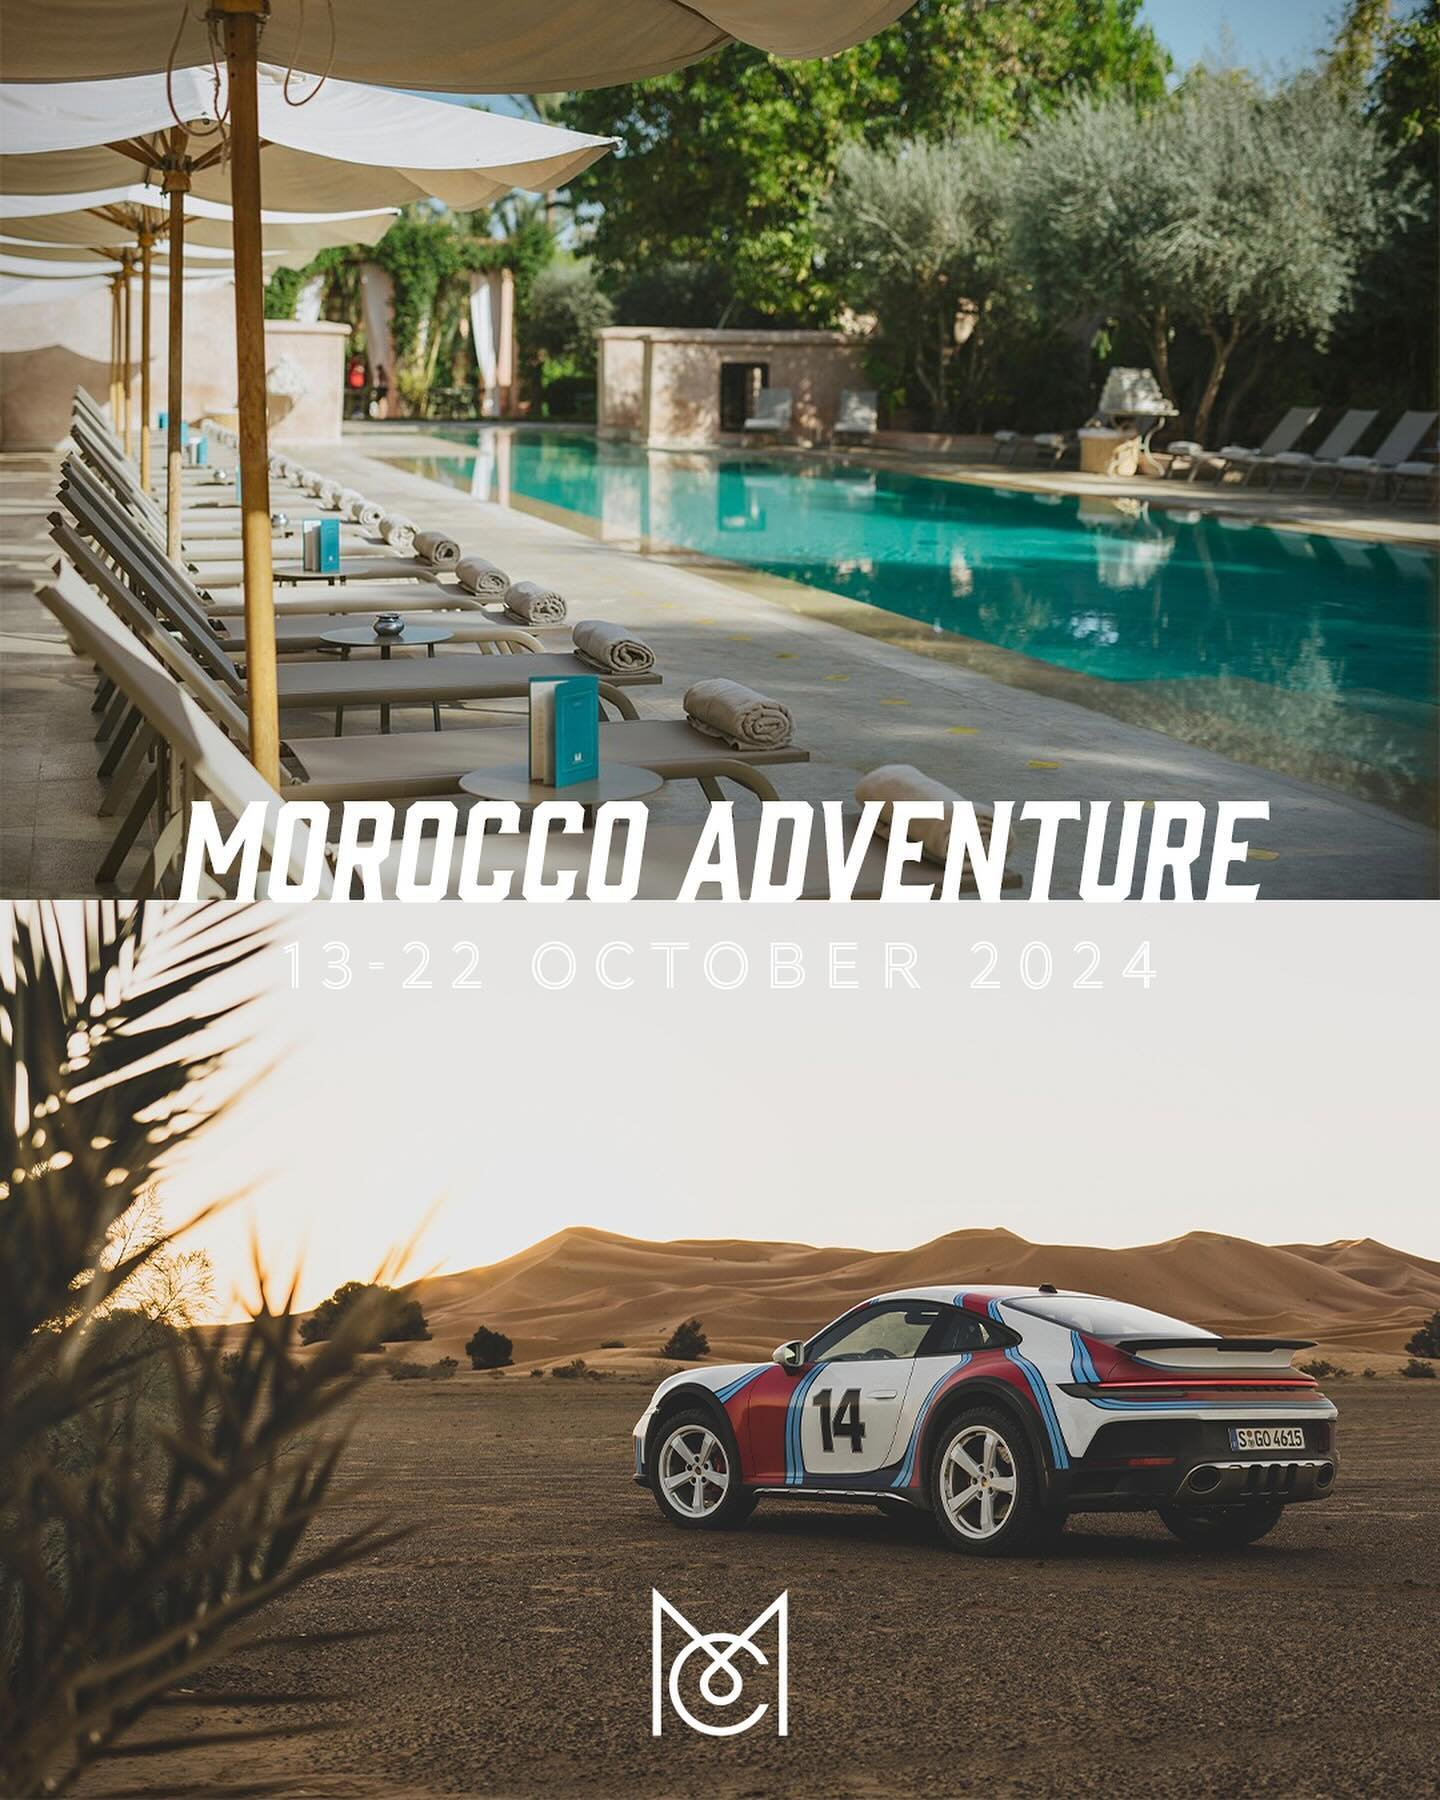 MOROCCO ADVENTURE
13-22 October 2024
&bull;
After several months of planning, the Morocco brochure is now complete. Limited to just 10 customer cars, this will be a very special event.

As part of our team, joining Paul will be Nick - The Expert - fo